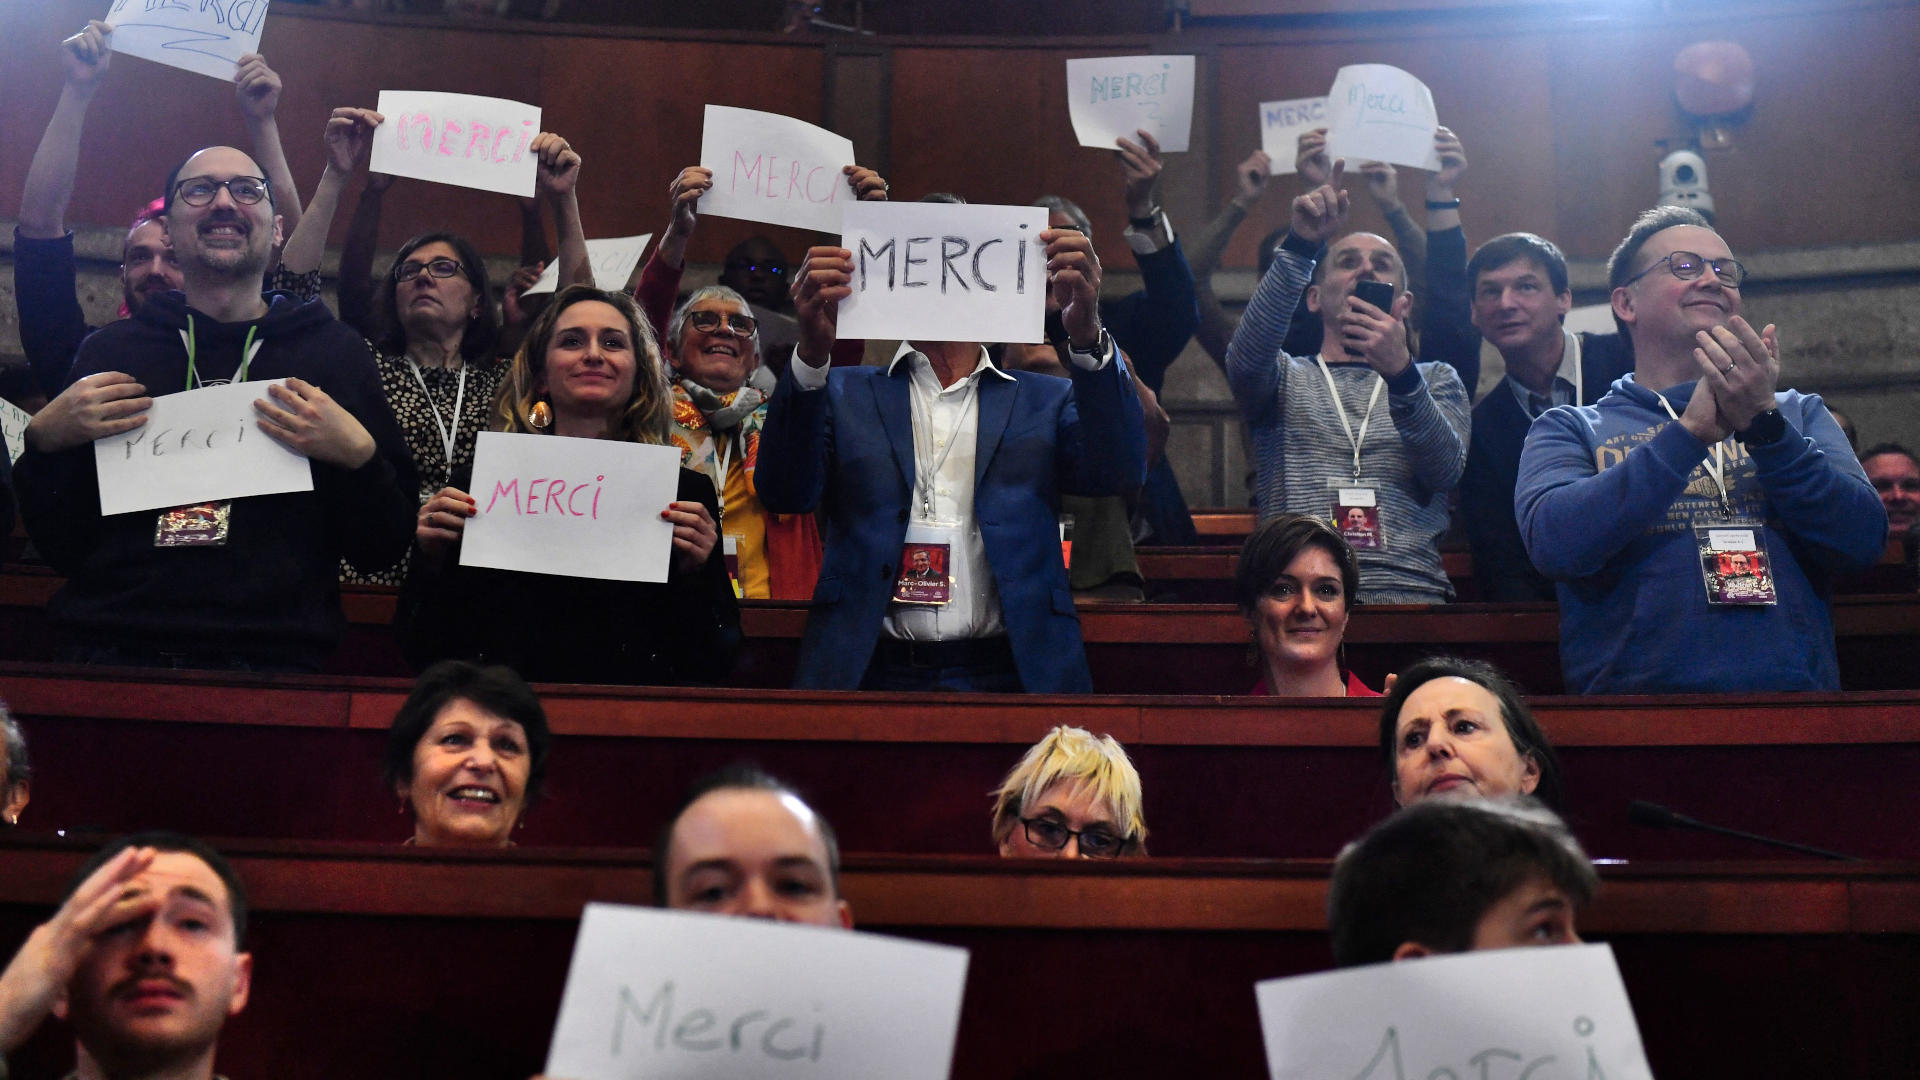 At the closing meeting of the Citizens' Assembly on the End of Life in Paris this April, attendees hold signs reading "Thank you" in French.